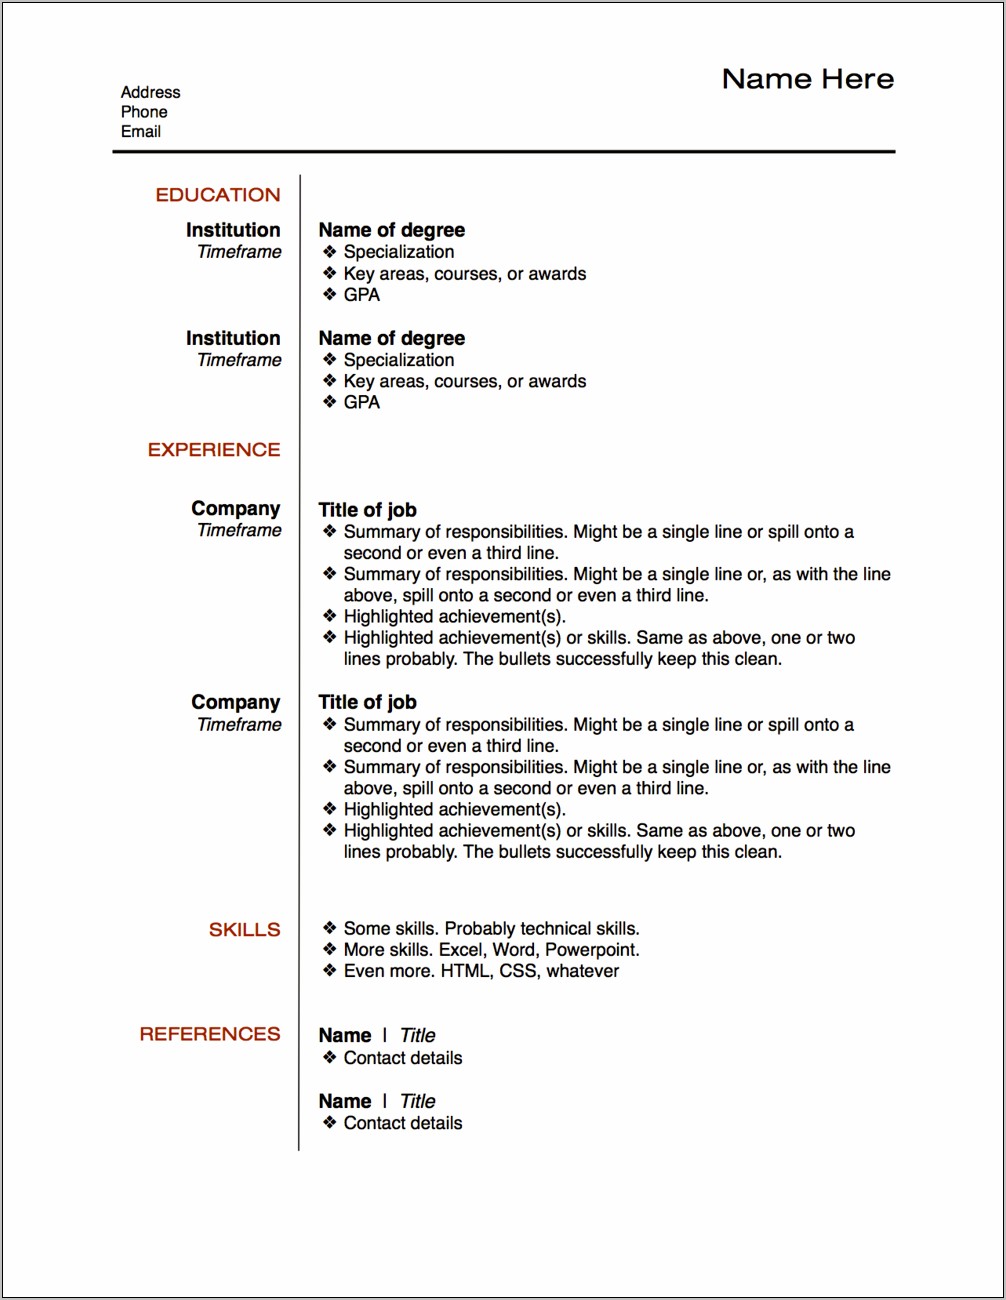 Best Bullets Point To Use In Resume